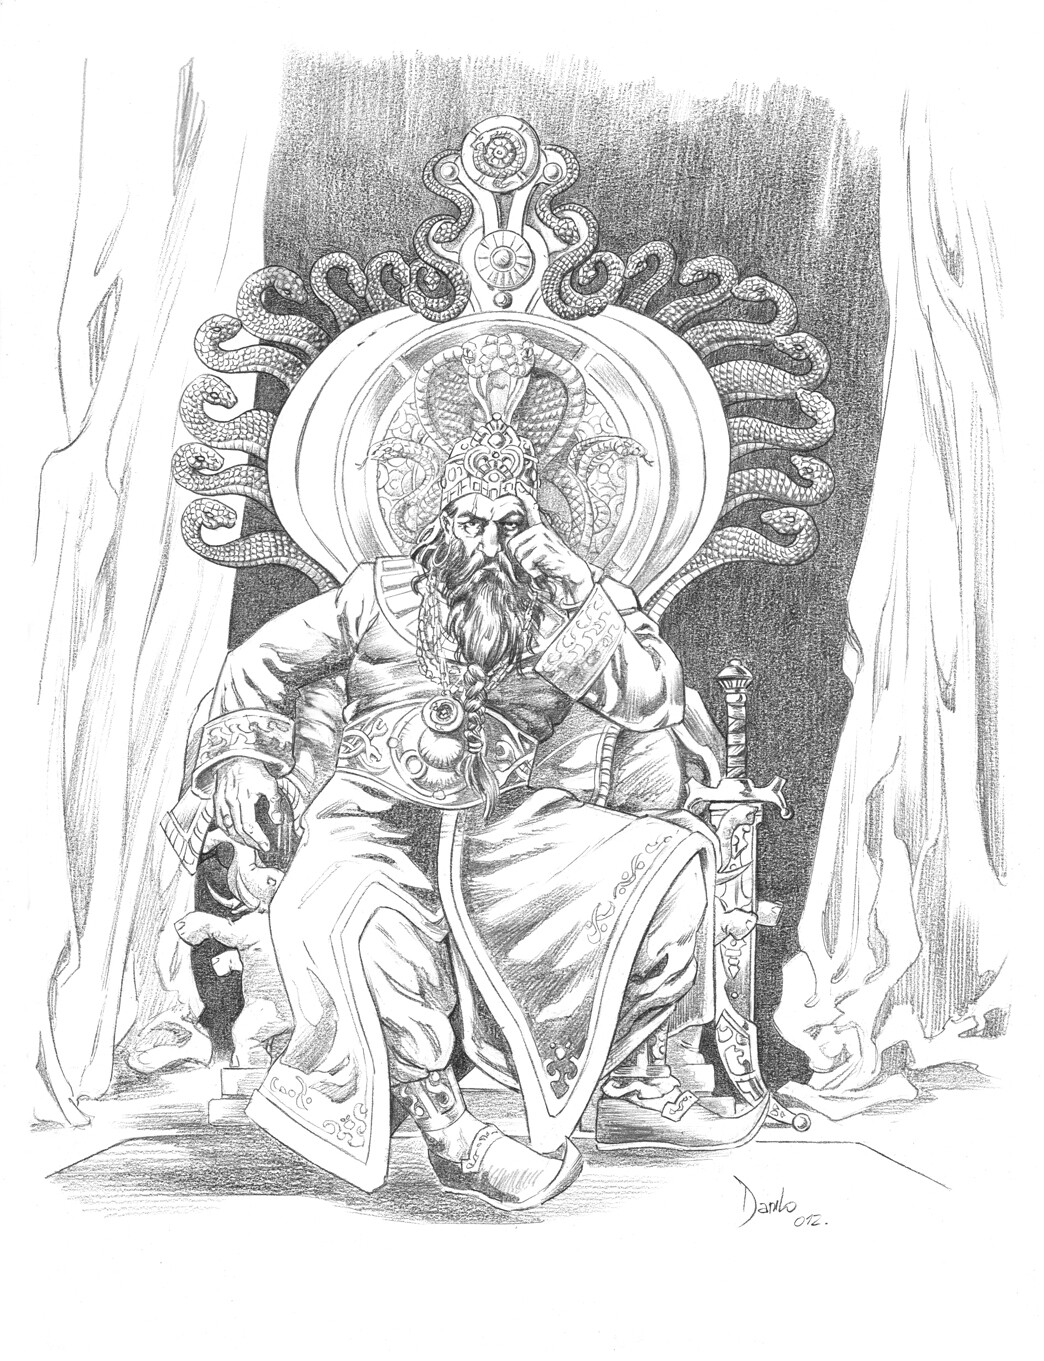 Scions of the Cursed King
King Veerendra